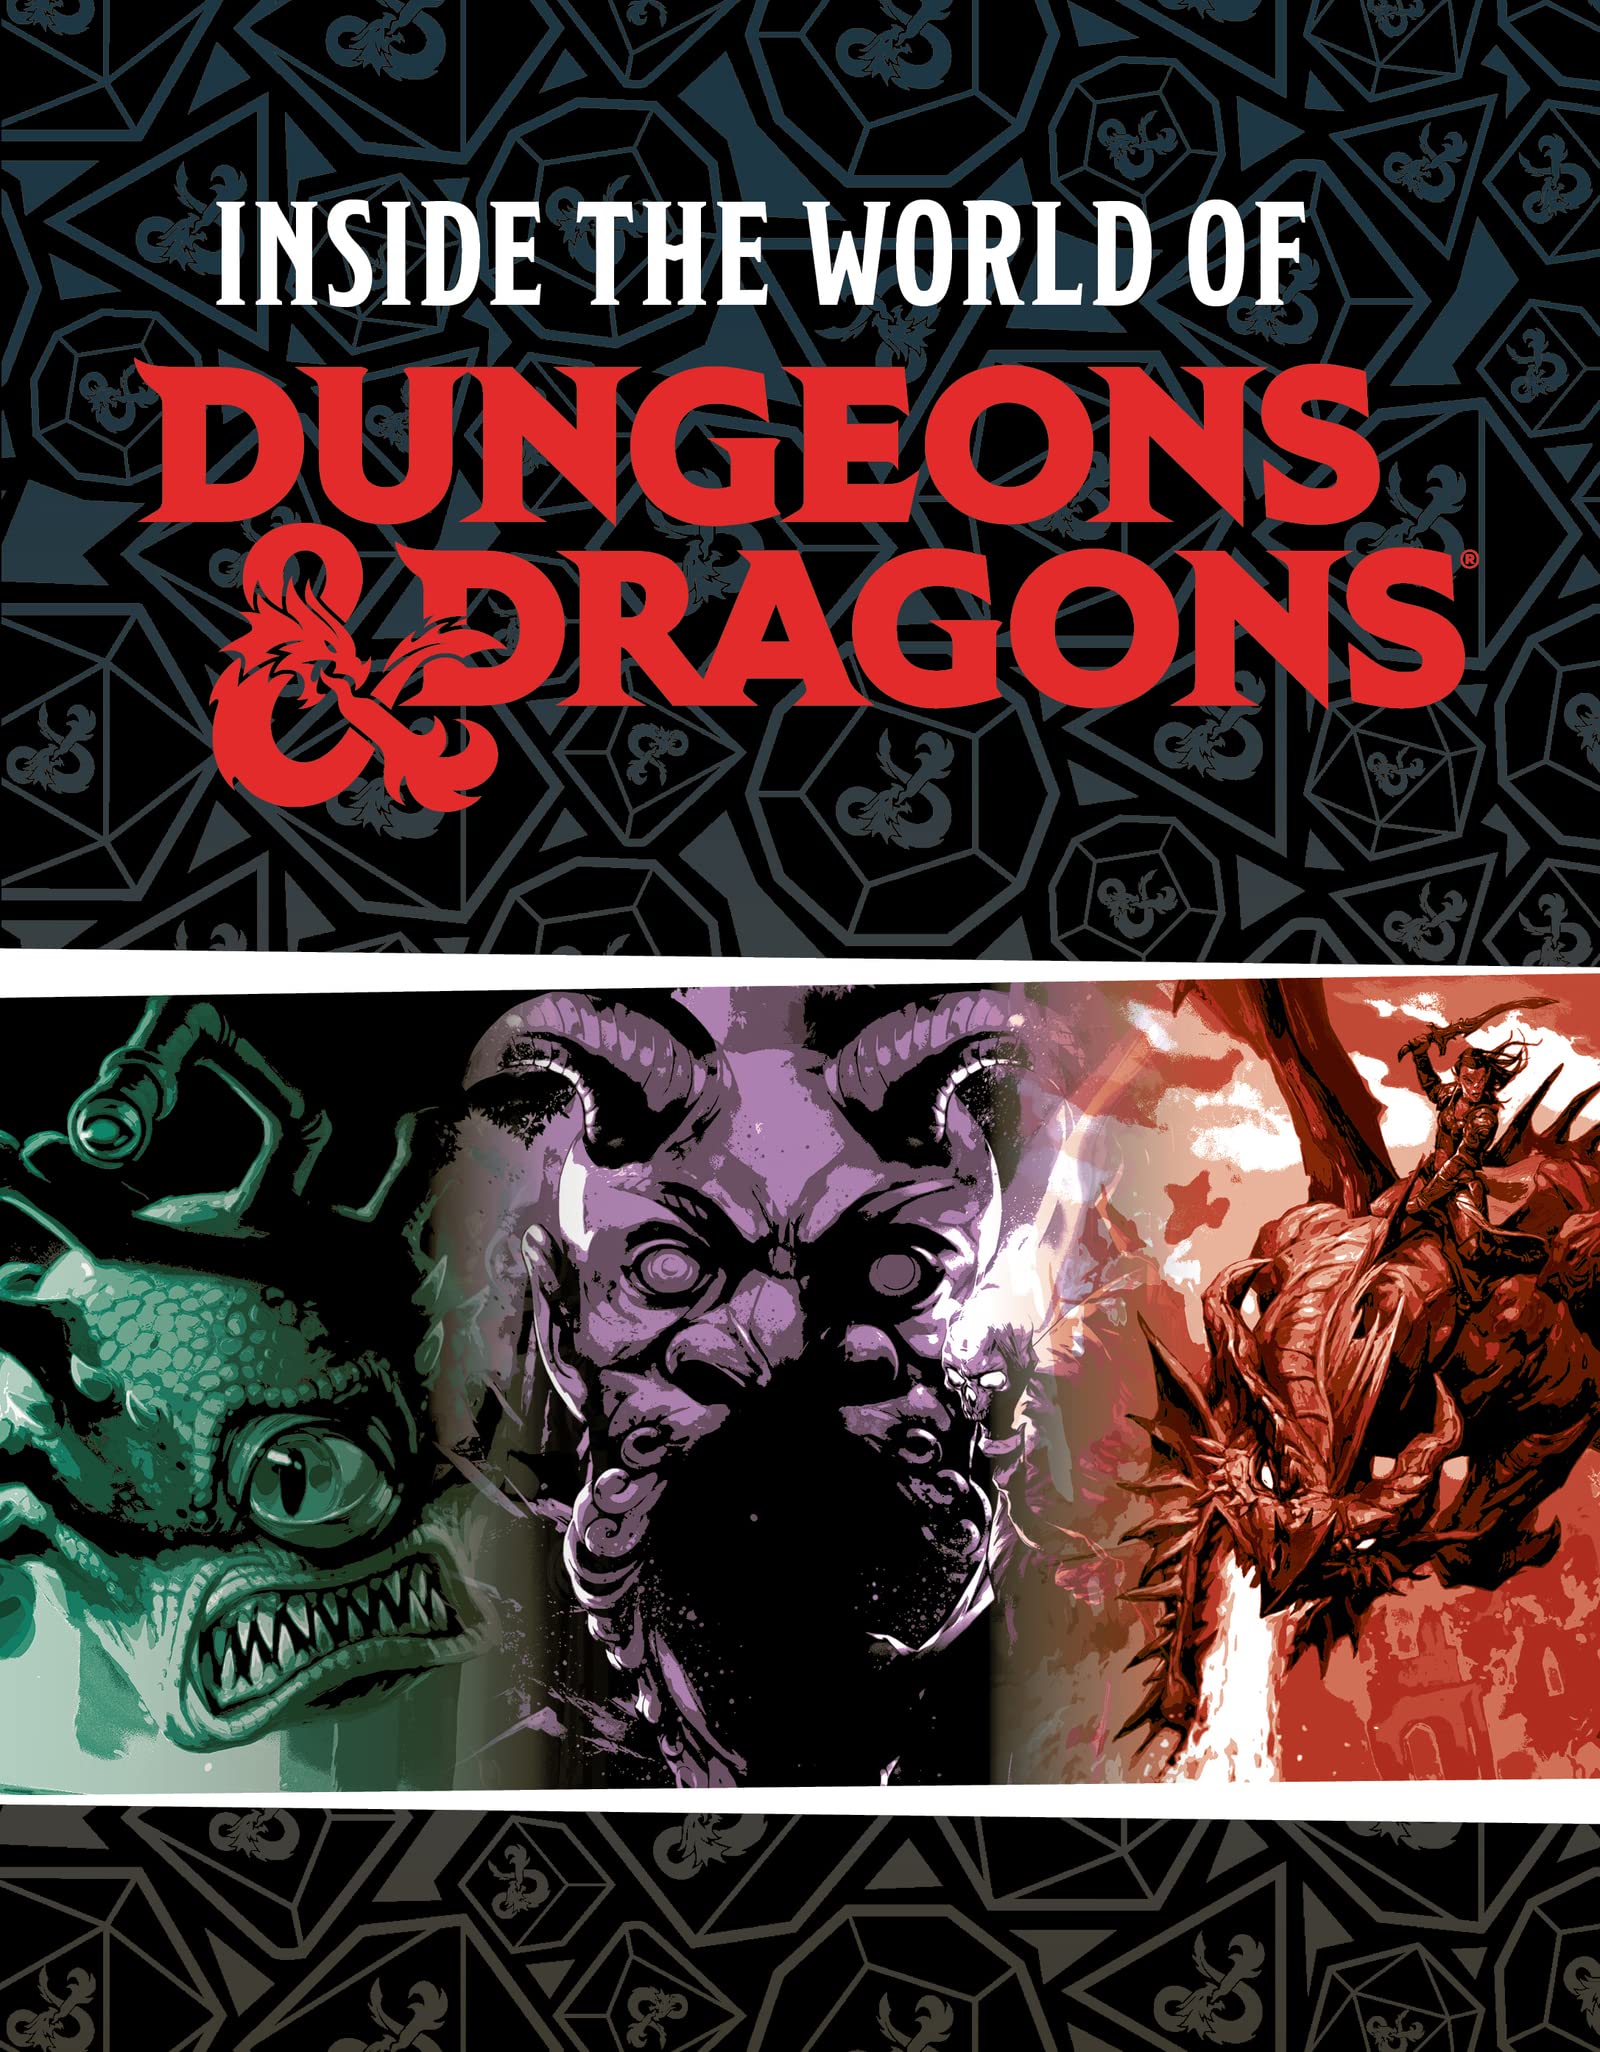 Inside the World of Dungeons & Dragons